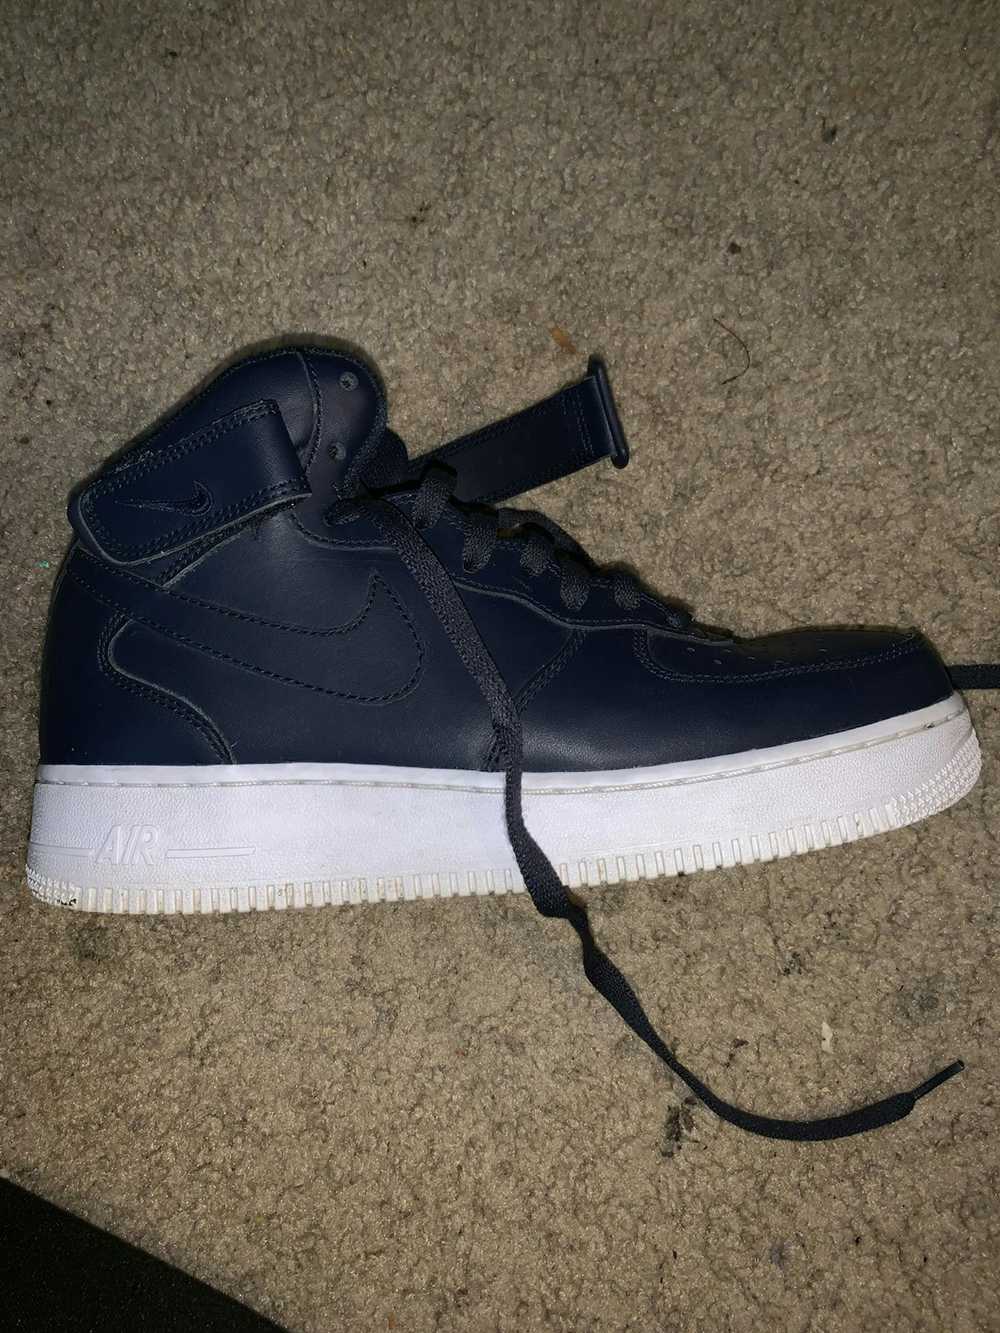 Nike Air Force 1 Mid - image 1